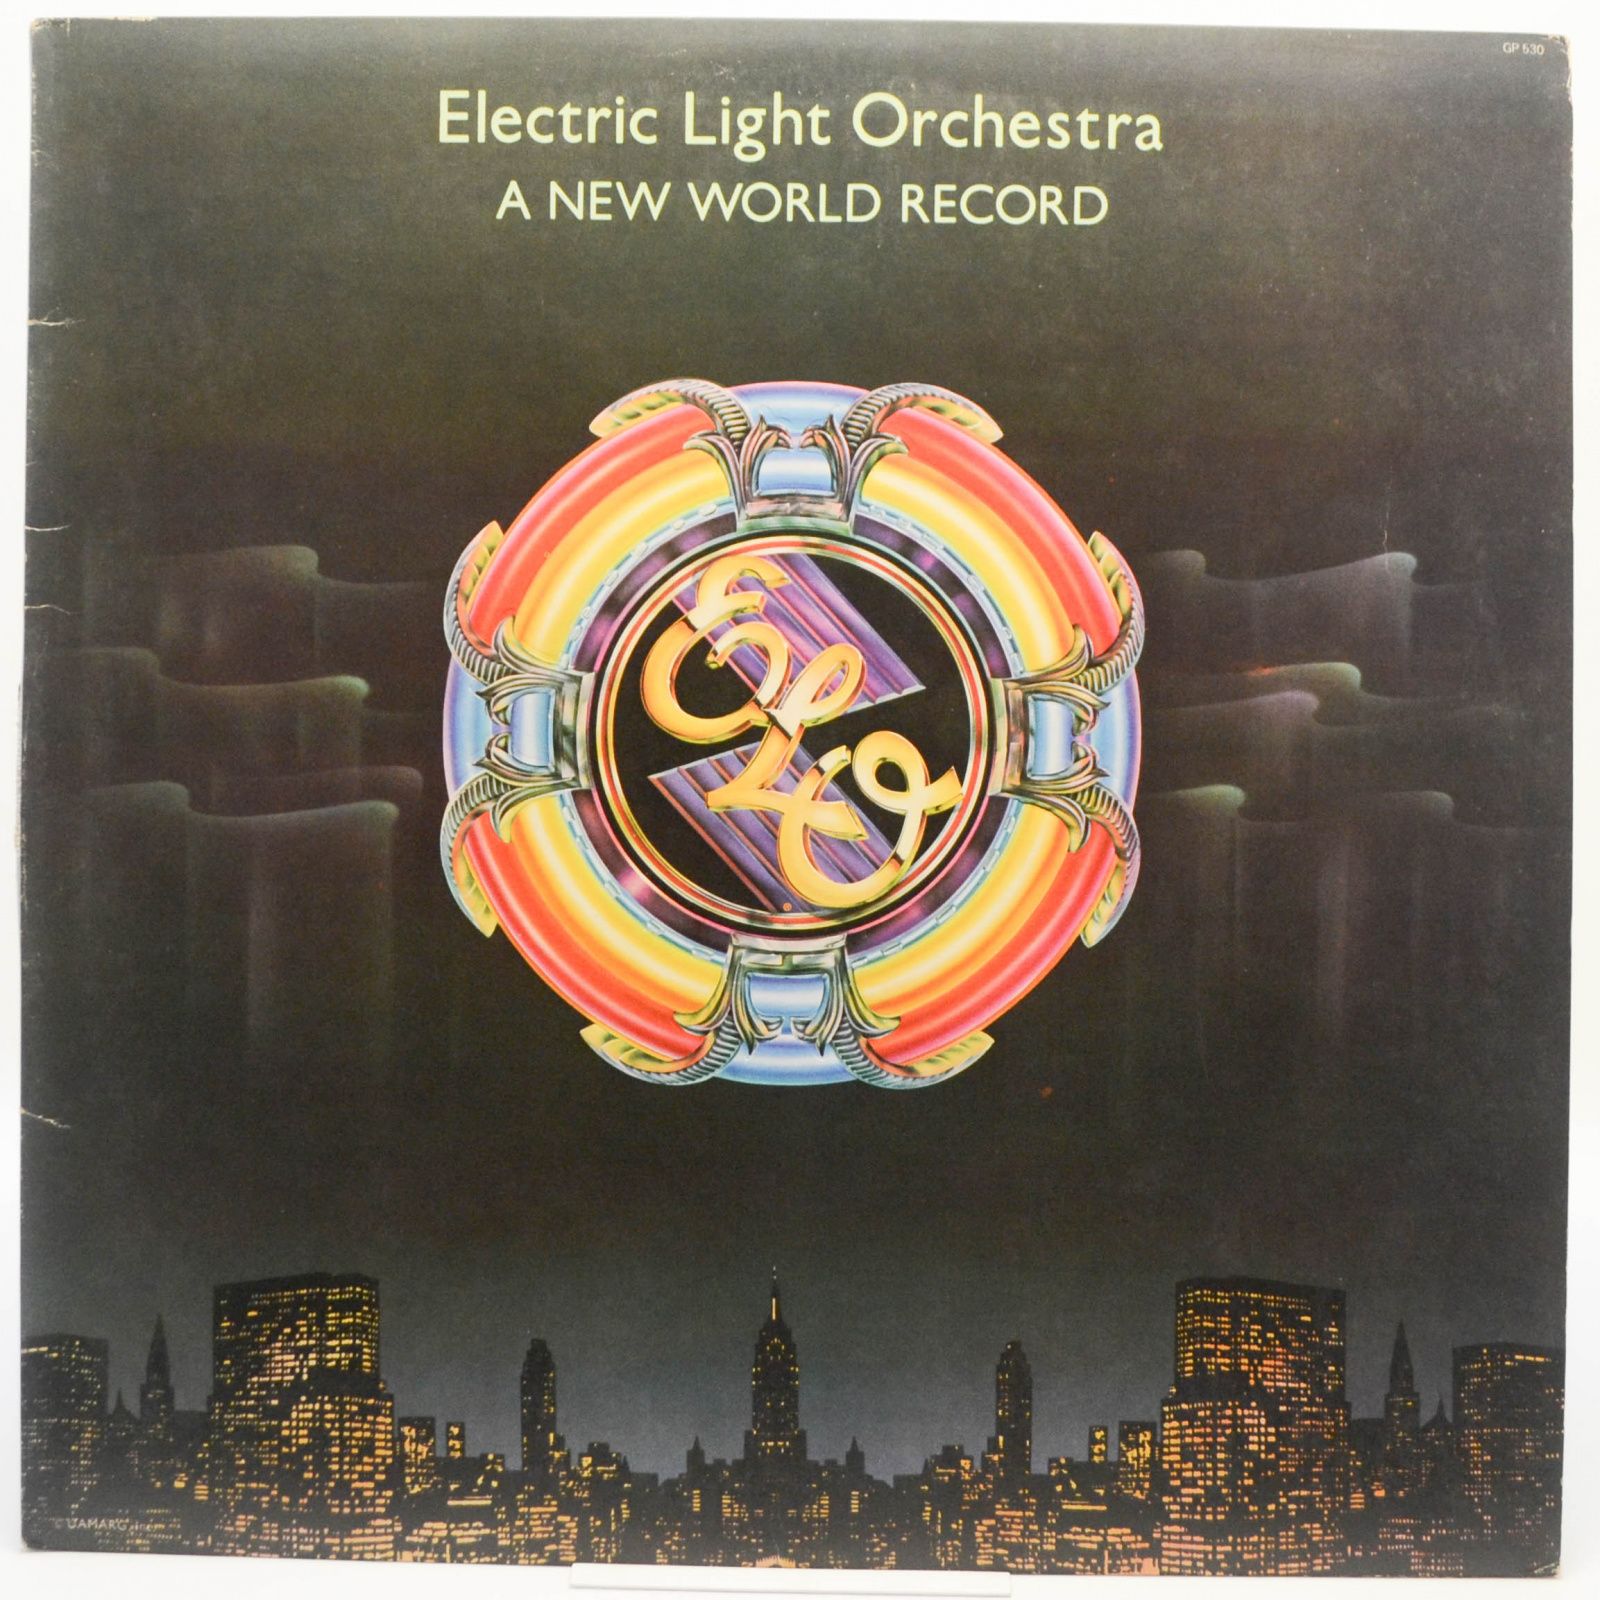 Electric Light Orchestra — A New World Record, 1977